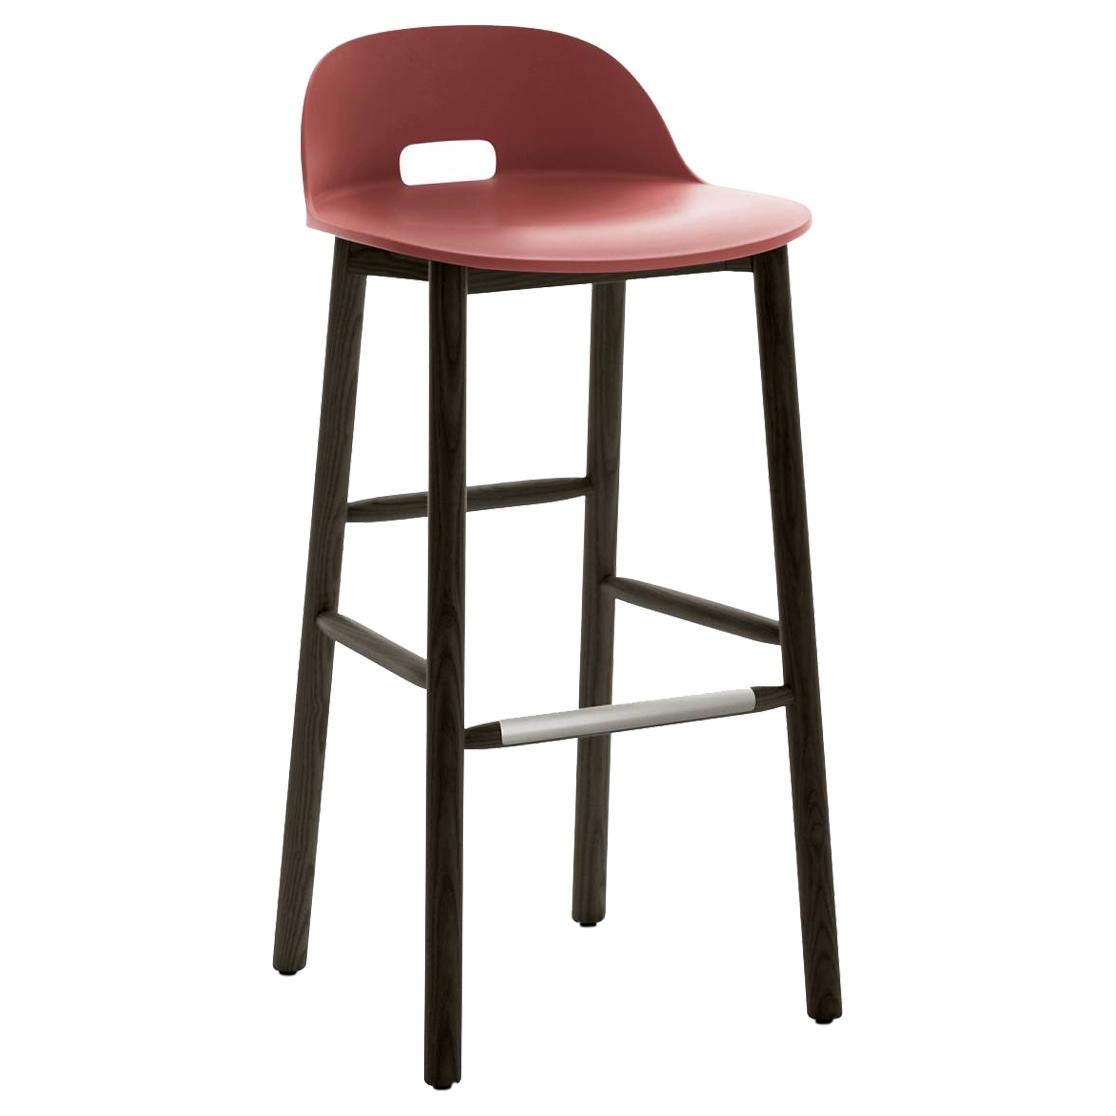 Emeco Alfi Barstool in Red and Dark Ash with Low Back by Jasper Morrison For Sale